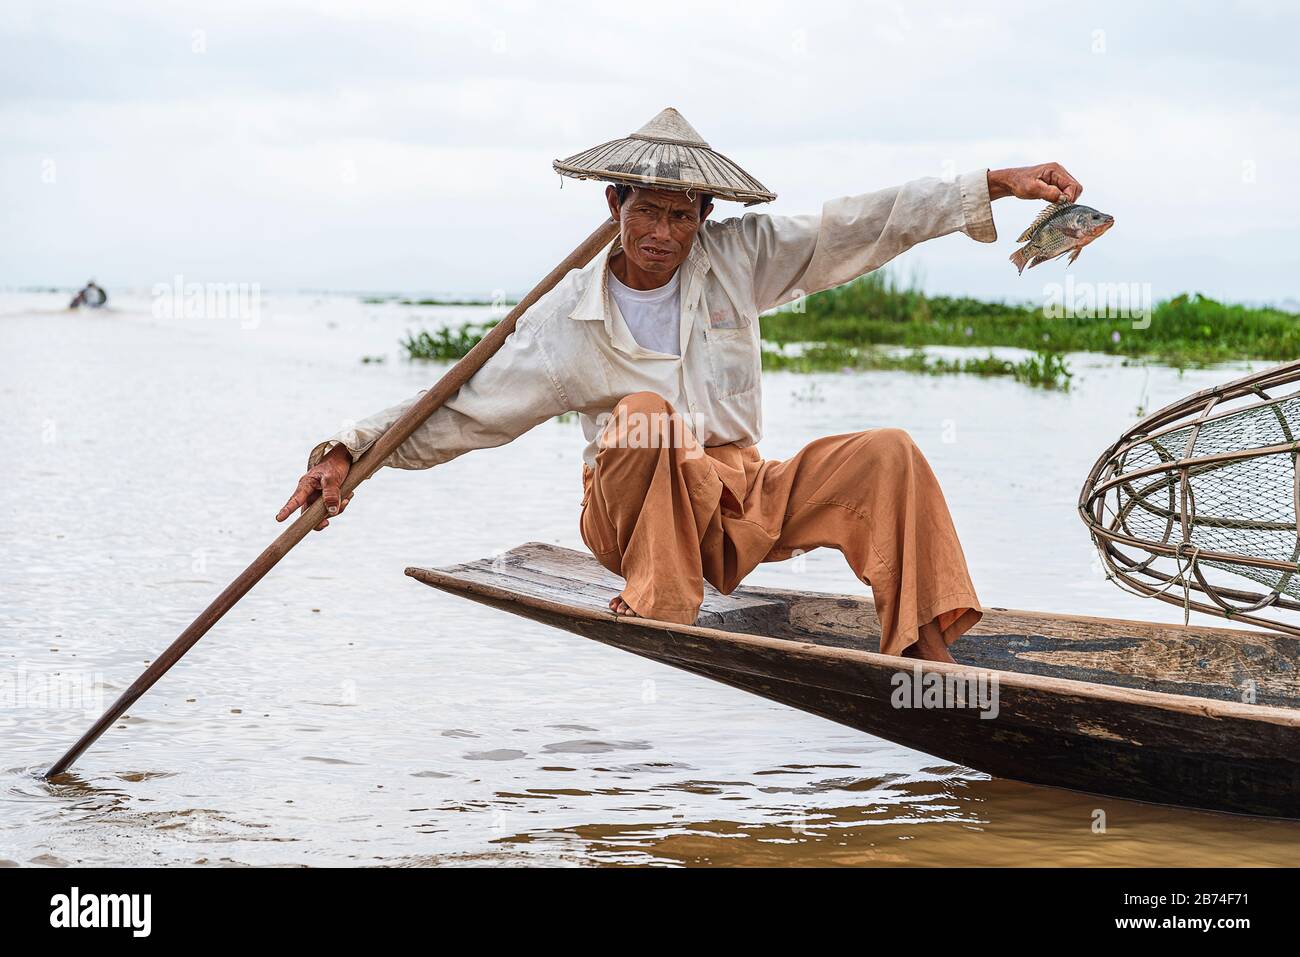 Inle lake: Myanmar - Asia. - 08-15-2019. The Intha fishermen of Inle Lake in Burma demonstrate their unusual technique for catching fish in the shallo Stock Photo